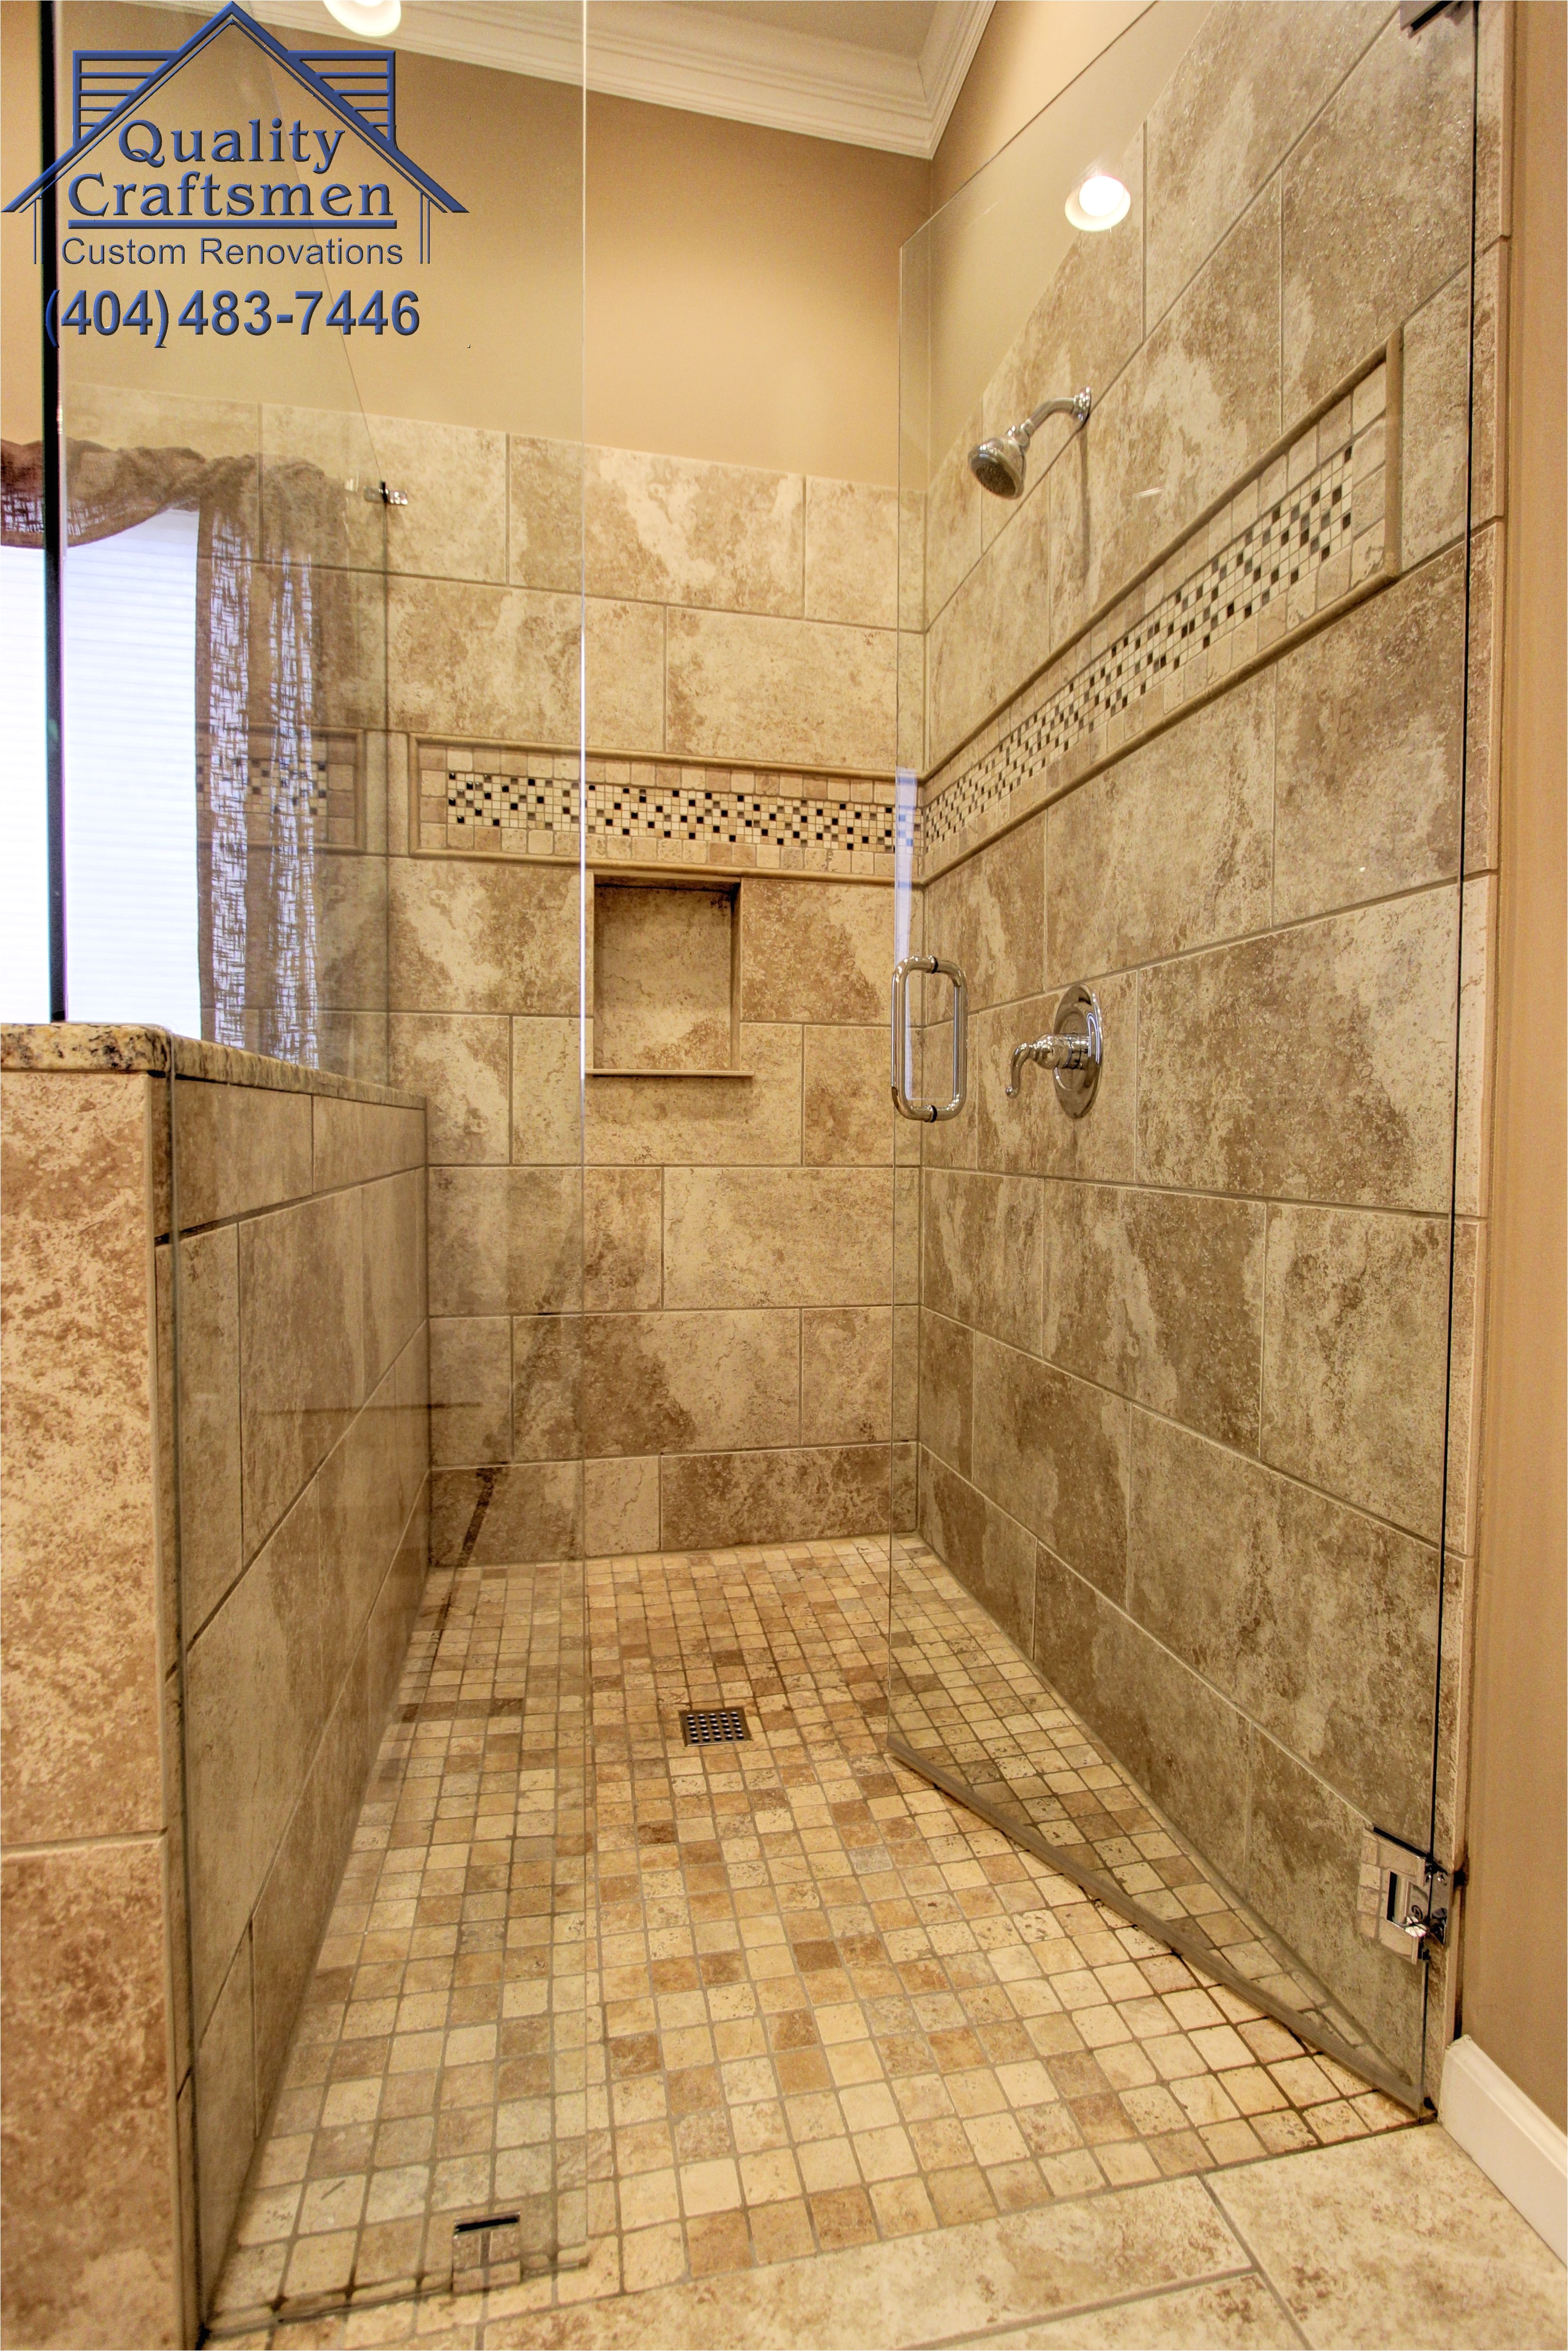 No curb walk in master shower Travertine tile and recycled glass accent Travertine